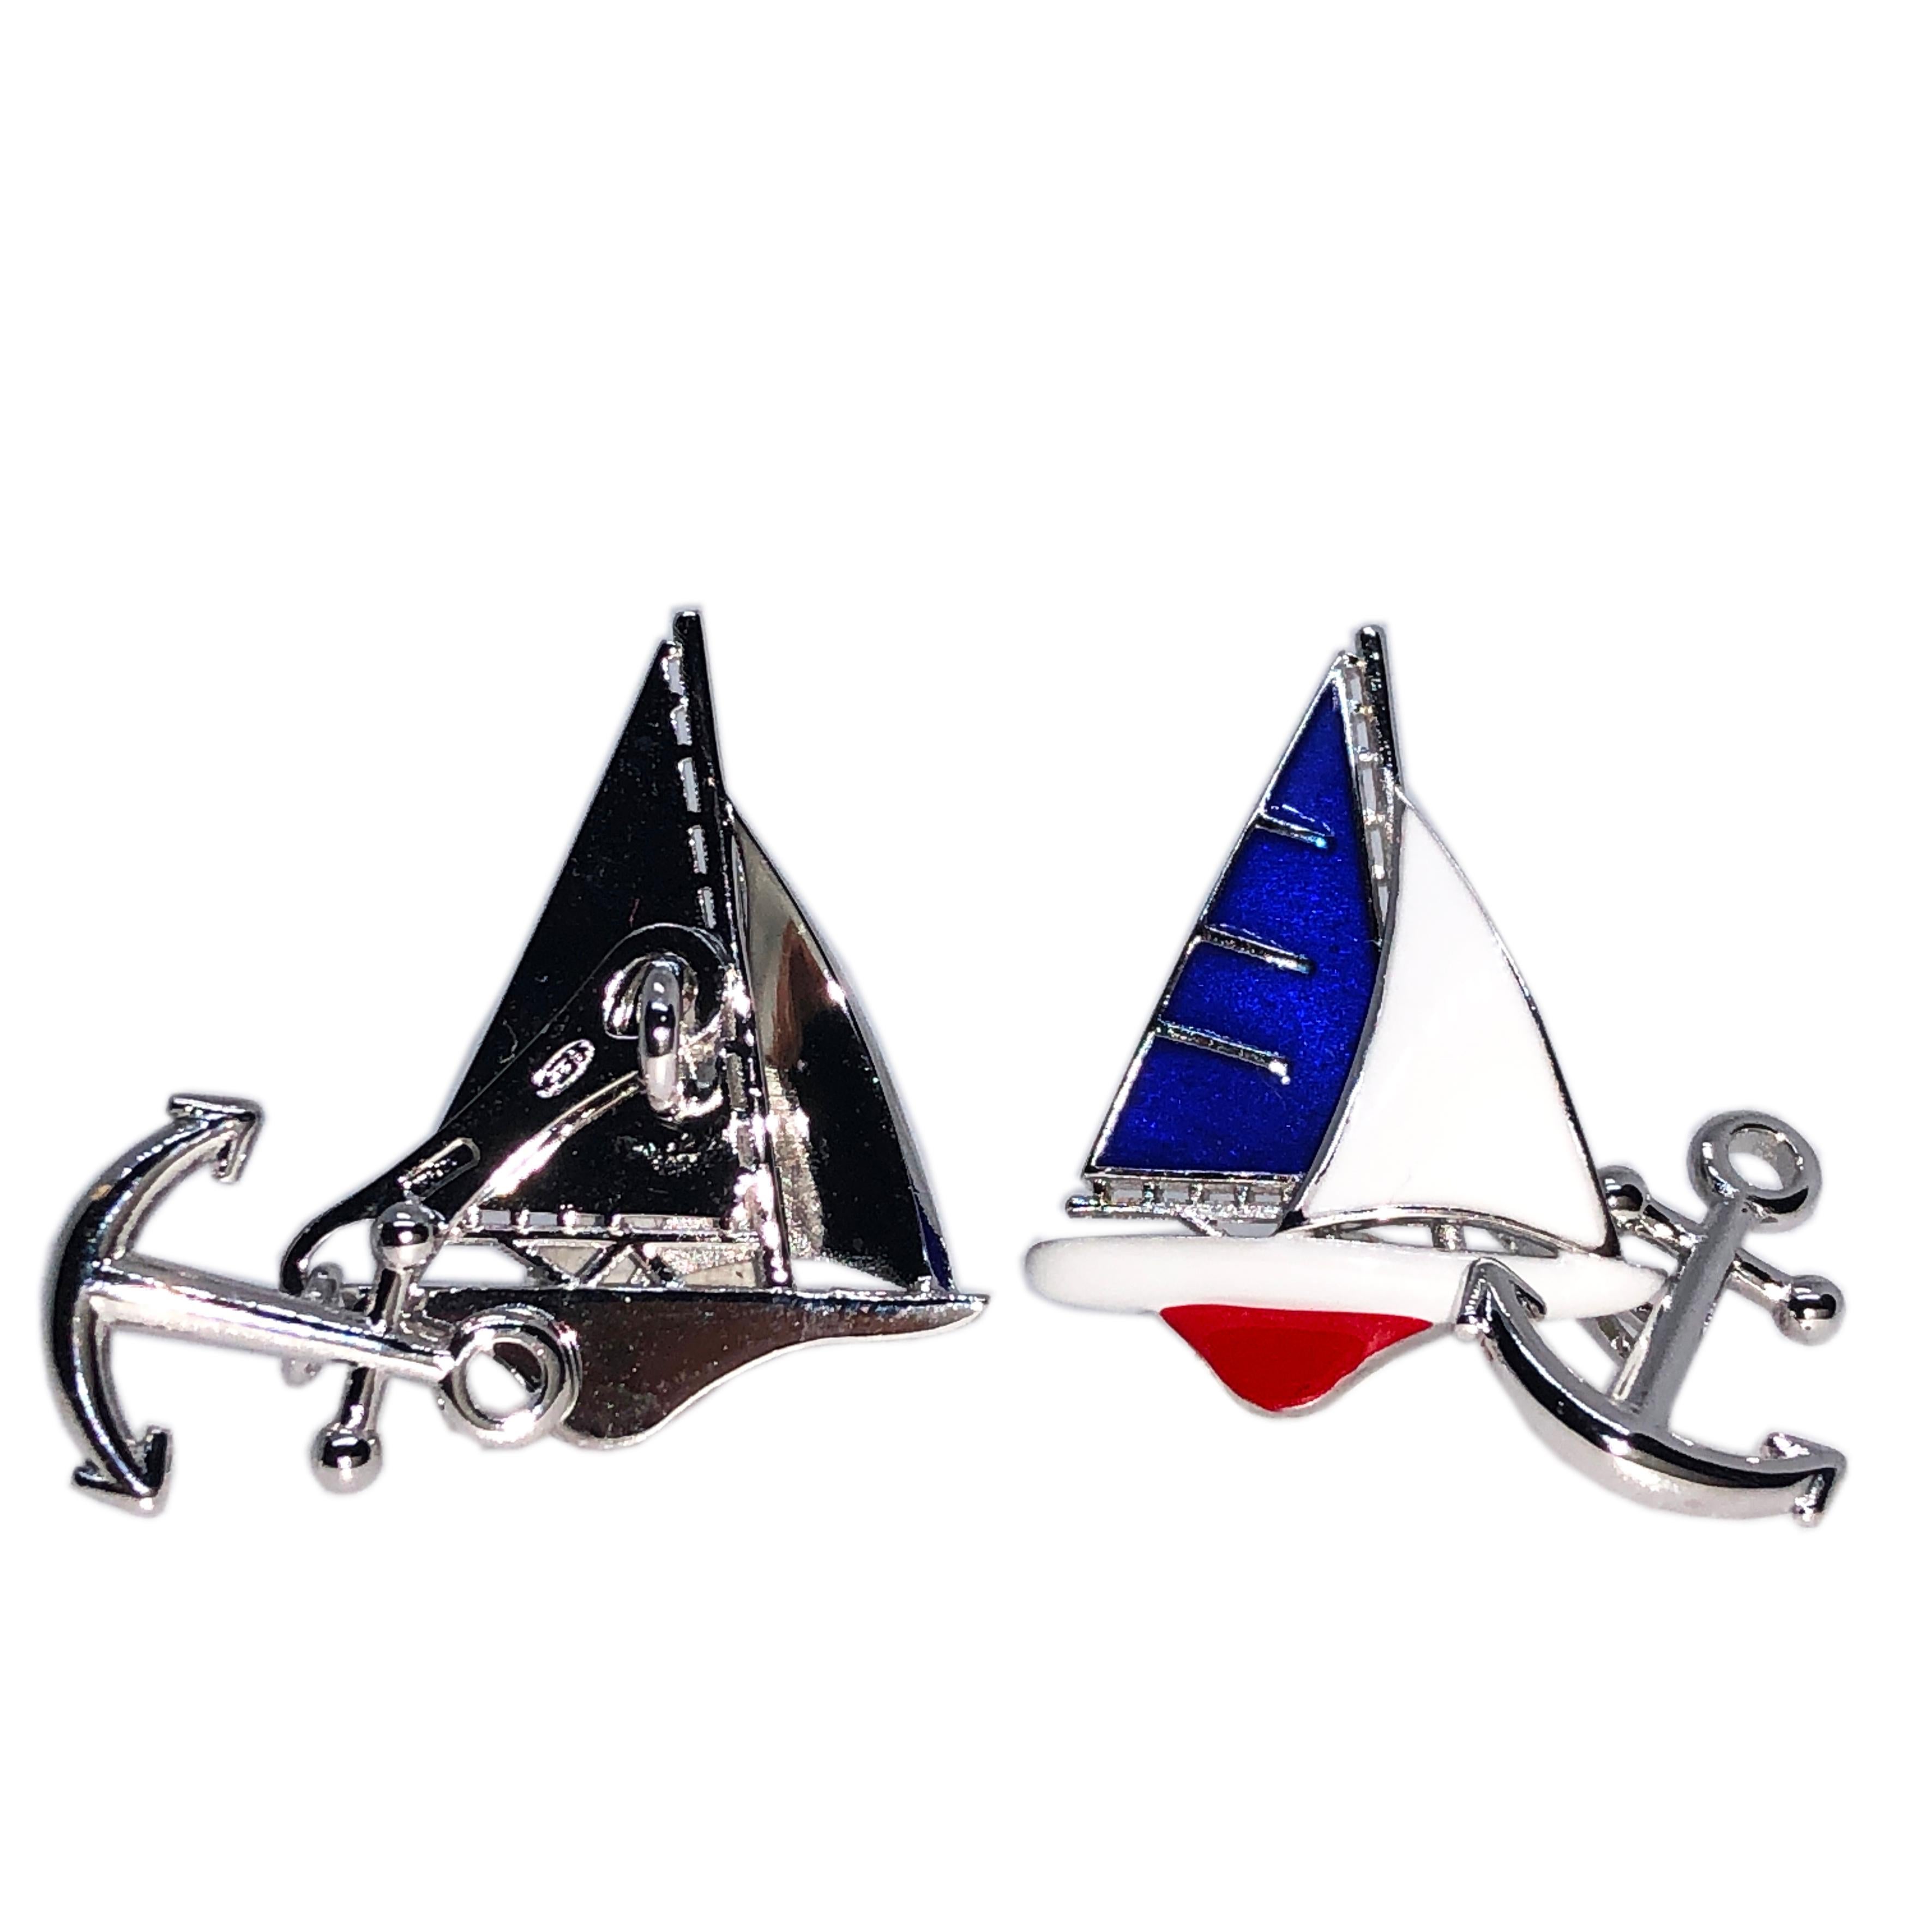 Unique, chic yet timeless, Blue, White and Red Hand Enameled Sailing Boat, Little Anchor Back, Sterling Silver Cufflinks.

In our smart fitted Tobacco Suede Leather Case and Pouch.